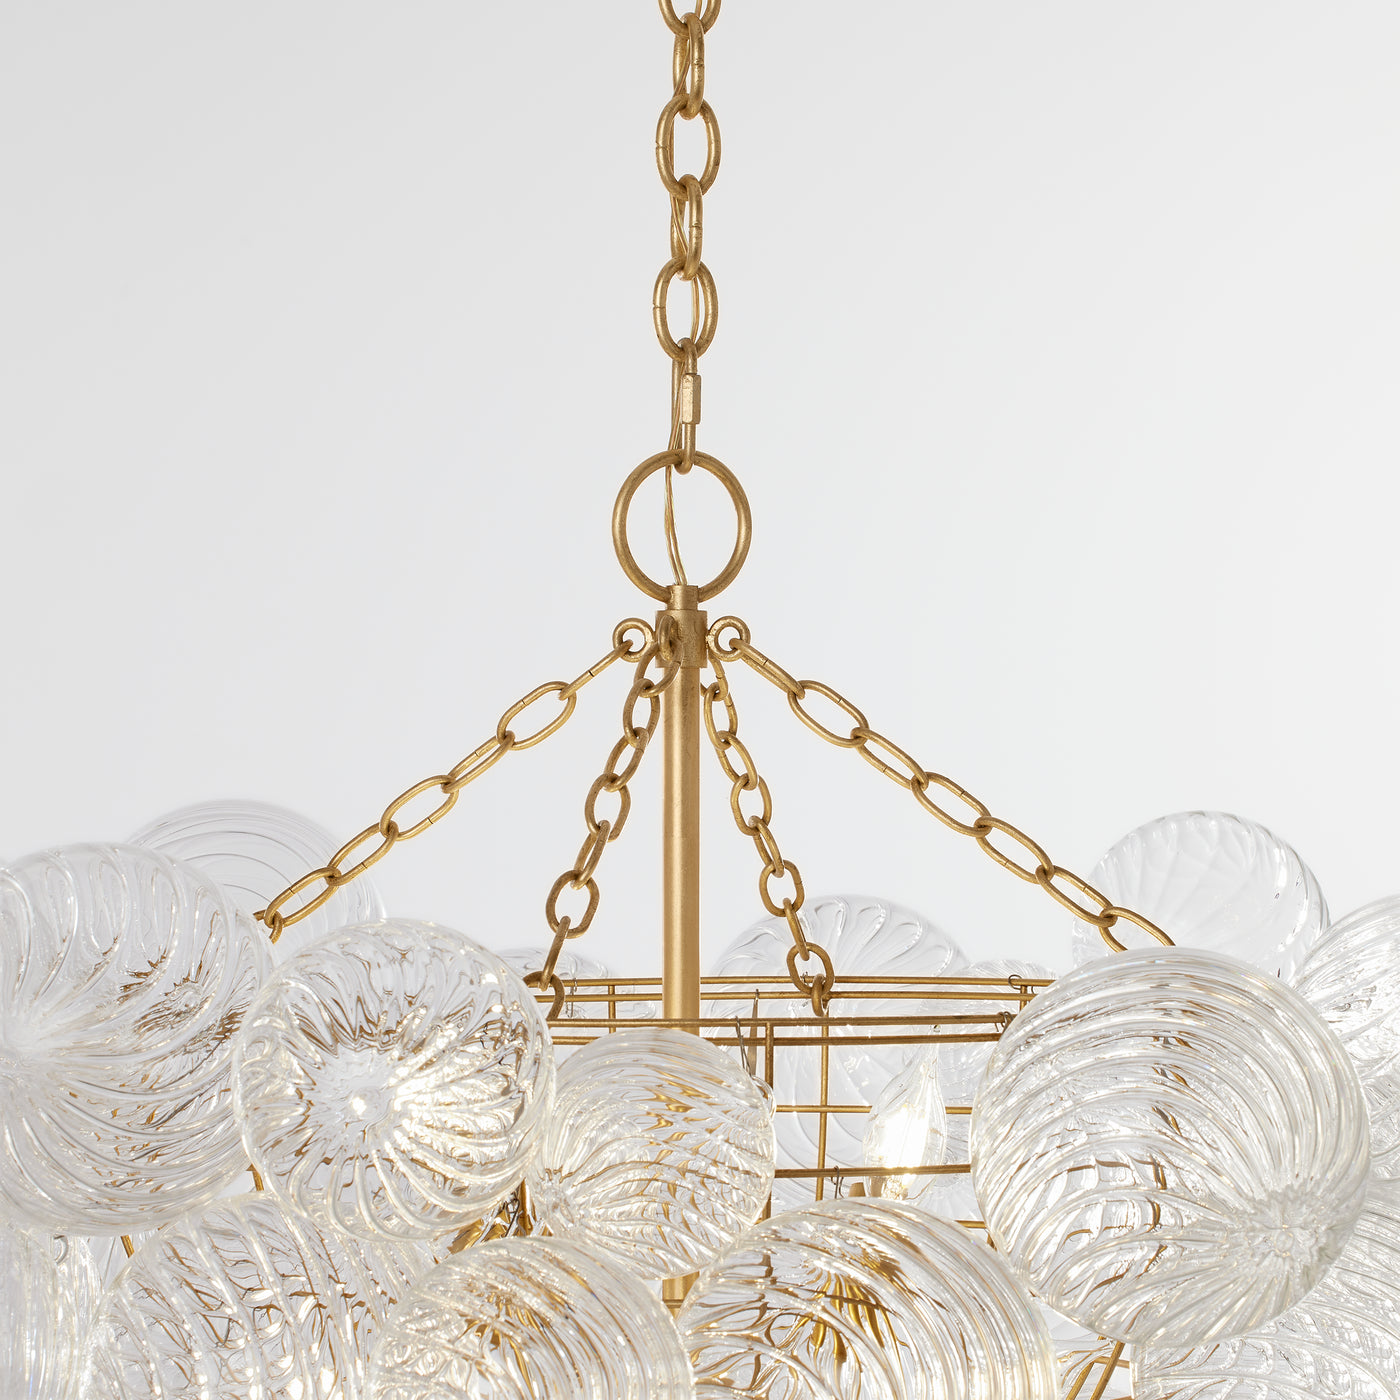 CHANDELIER GILD & CLEAR SWIRLED GLASS LARGE